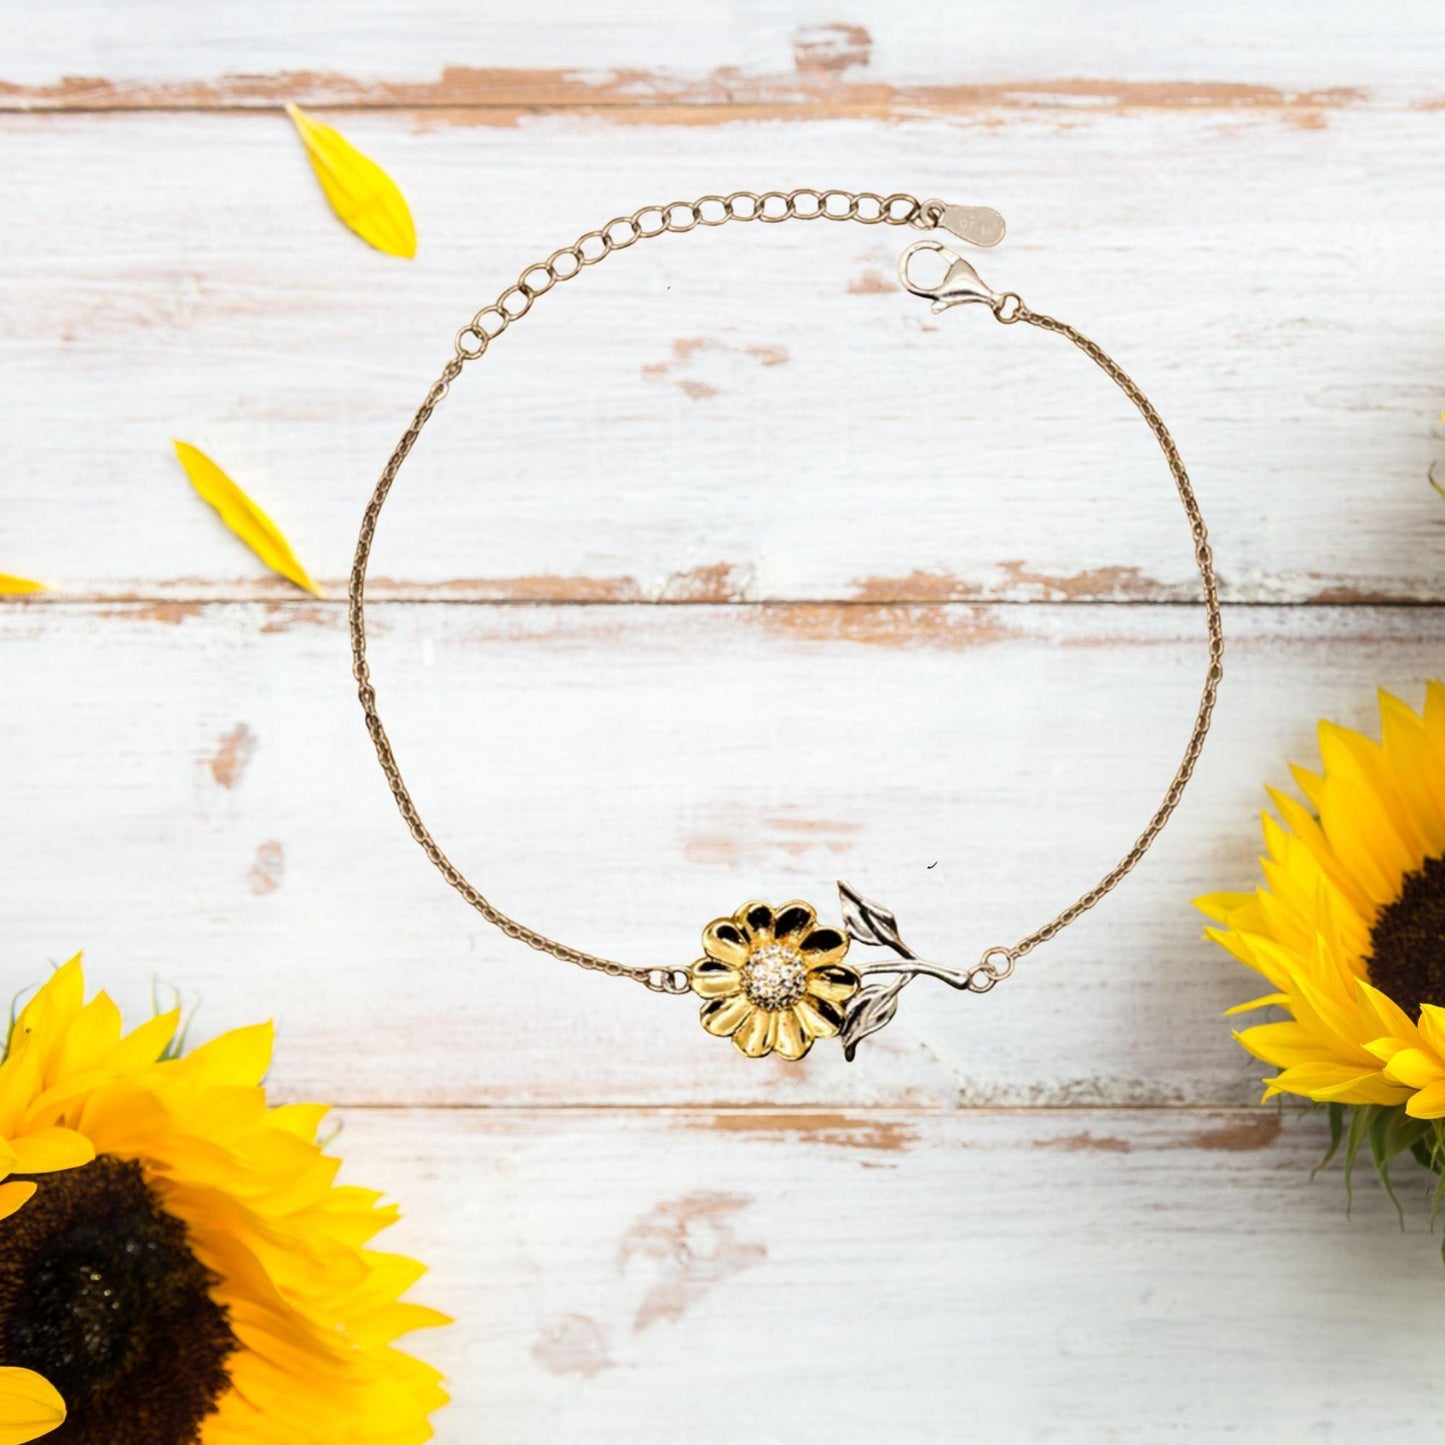 Florist Sunflower Bracelet - Thanks for being who you are - Birthday Christmas Jewelry Gifts Coworkers Colleague Boss - Mallard Moon Gift Shop